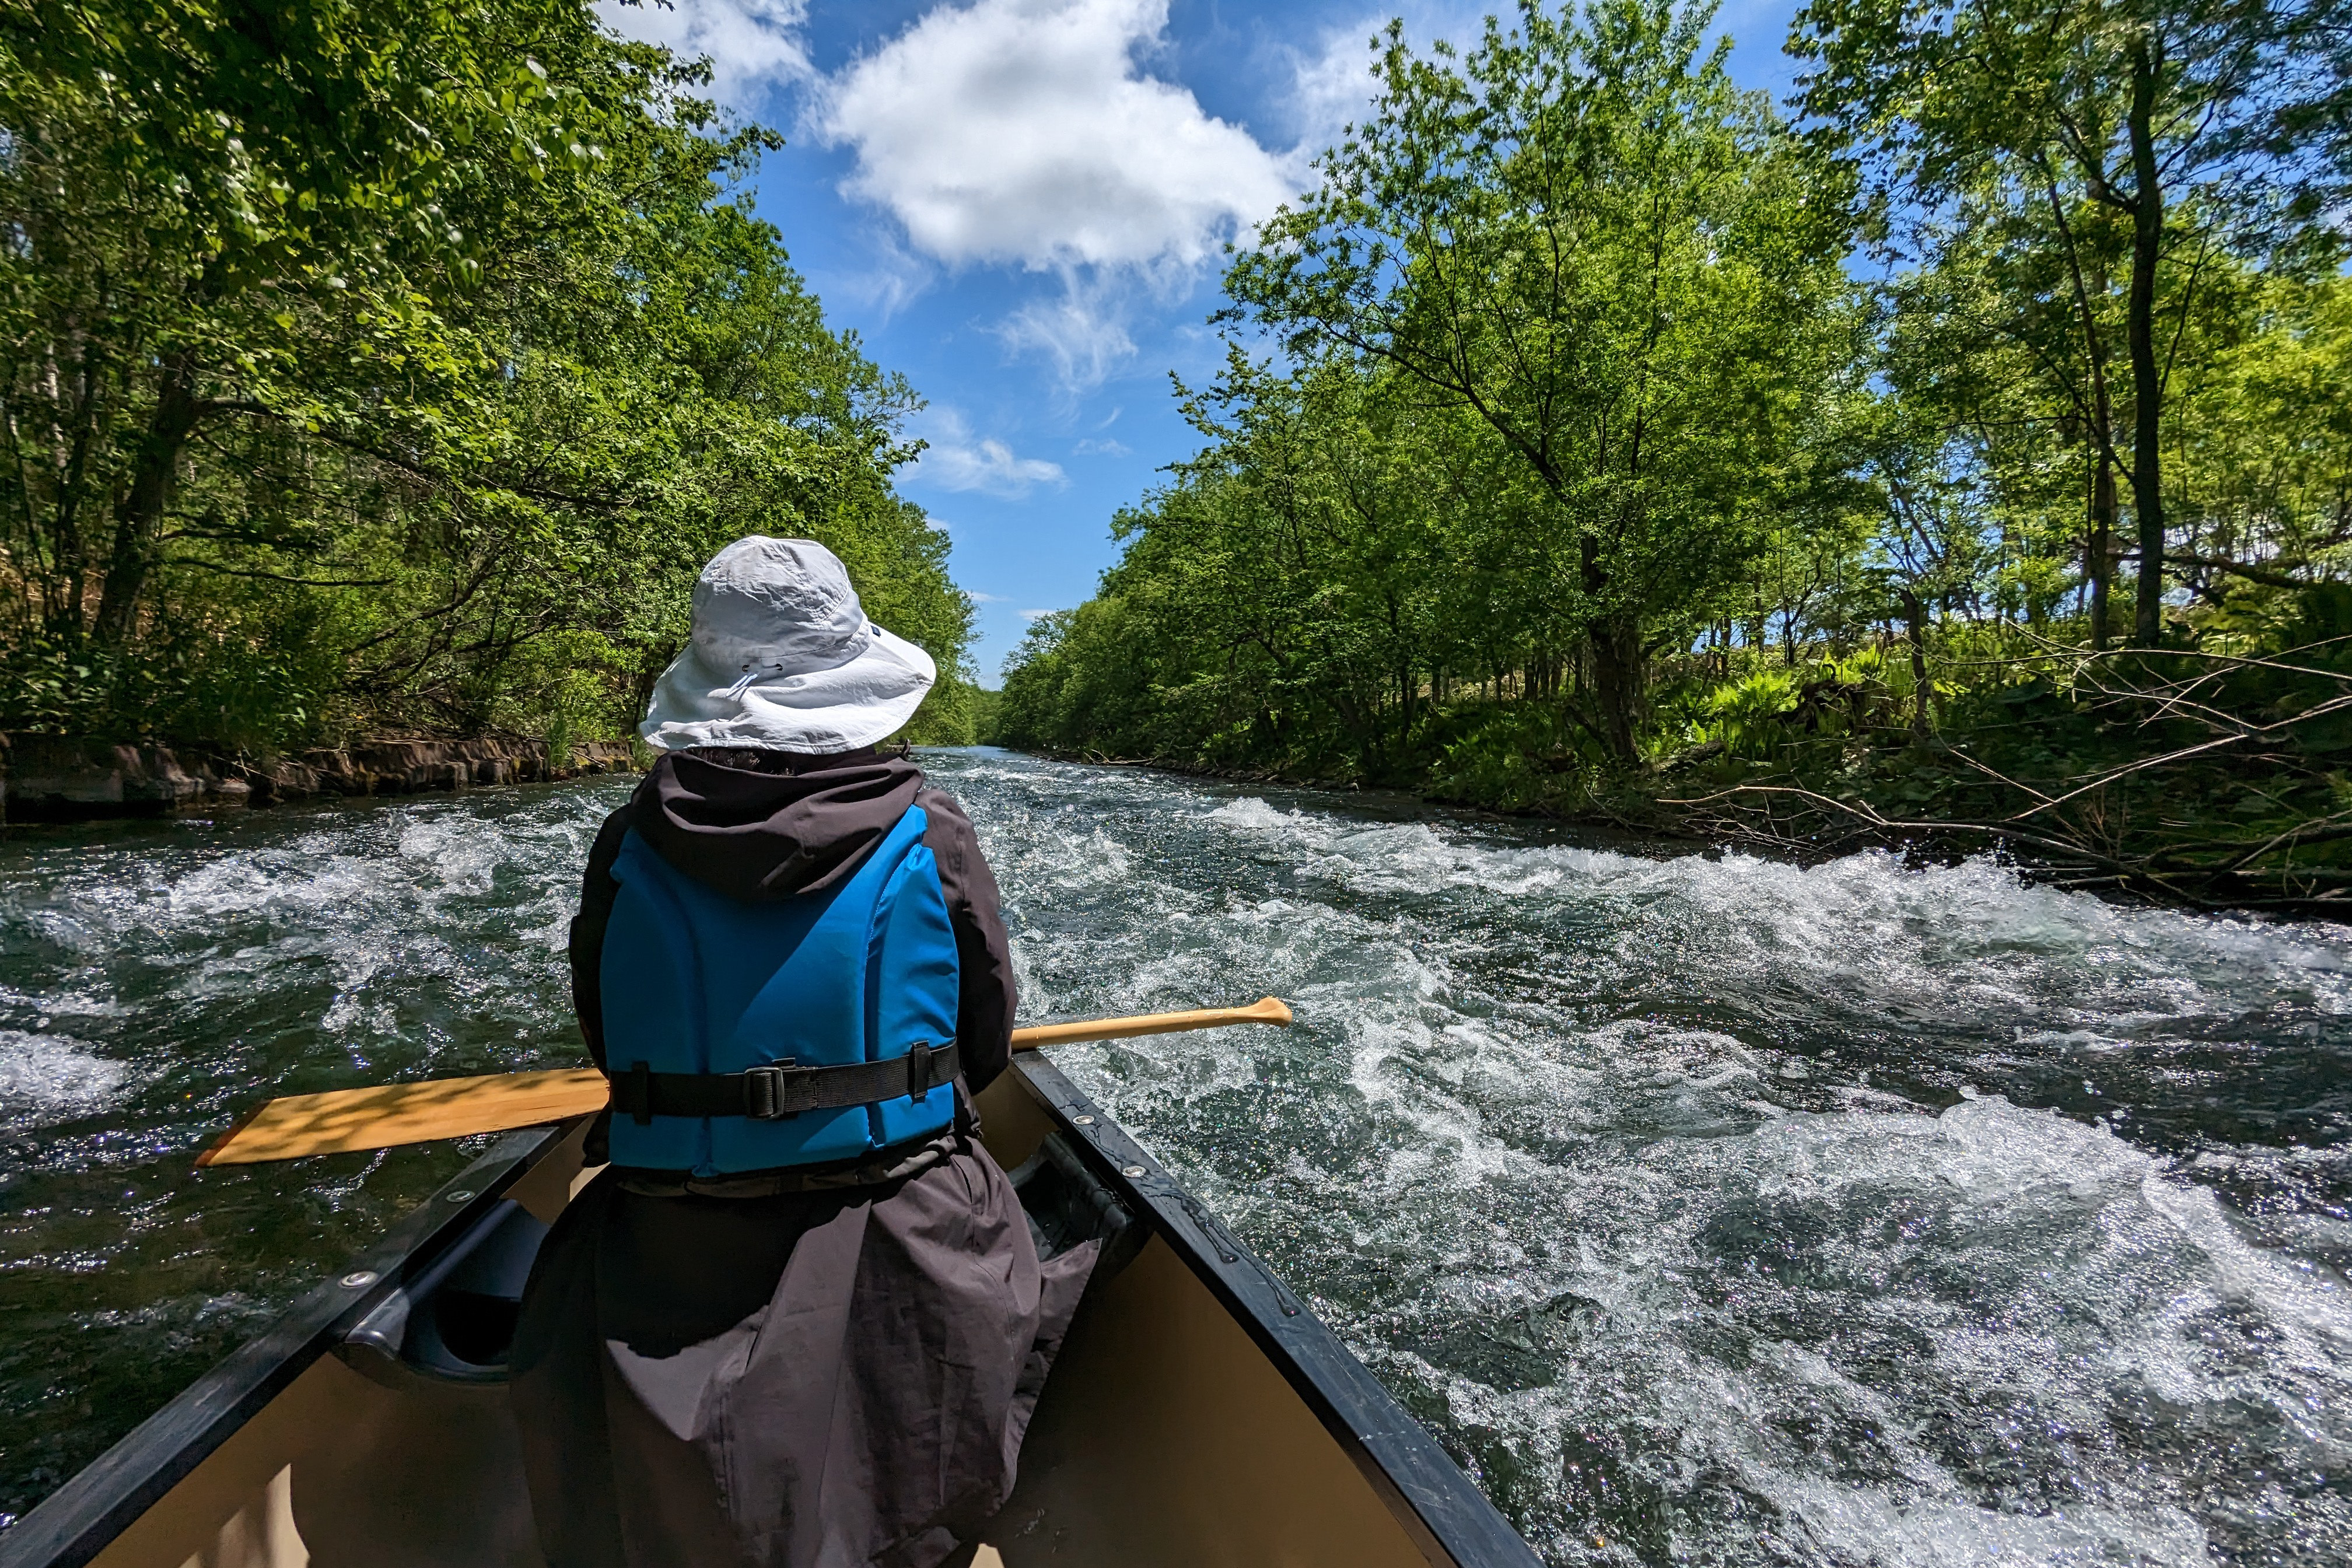 A canoeist takes in some small rapids on the Kushiro river